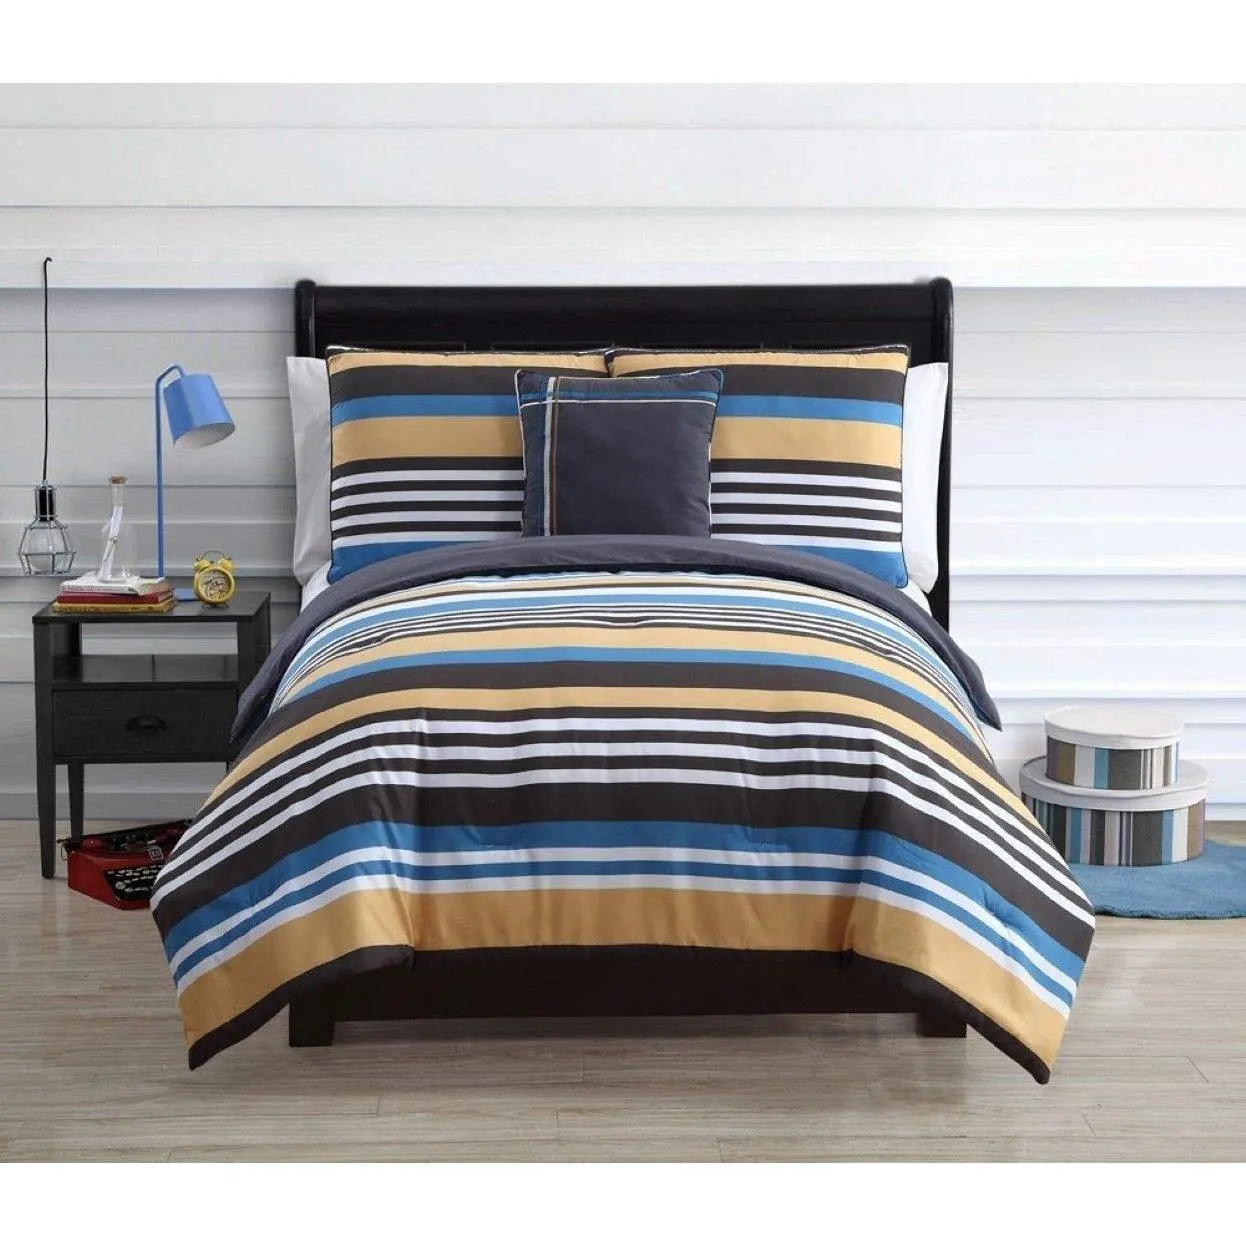 Buy Reversible Teen Kids Boys Striped Black Blue Yellow Comforter Bedding With Pillow Twin Includes Scented Candle Tarts In Cheap Price On Alibaba Com